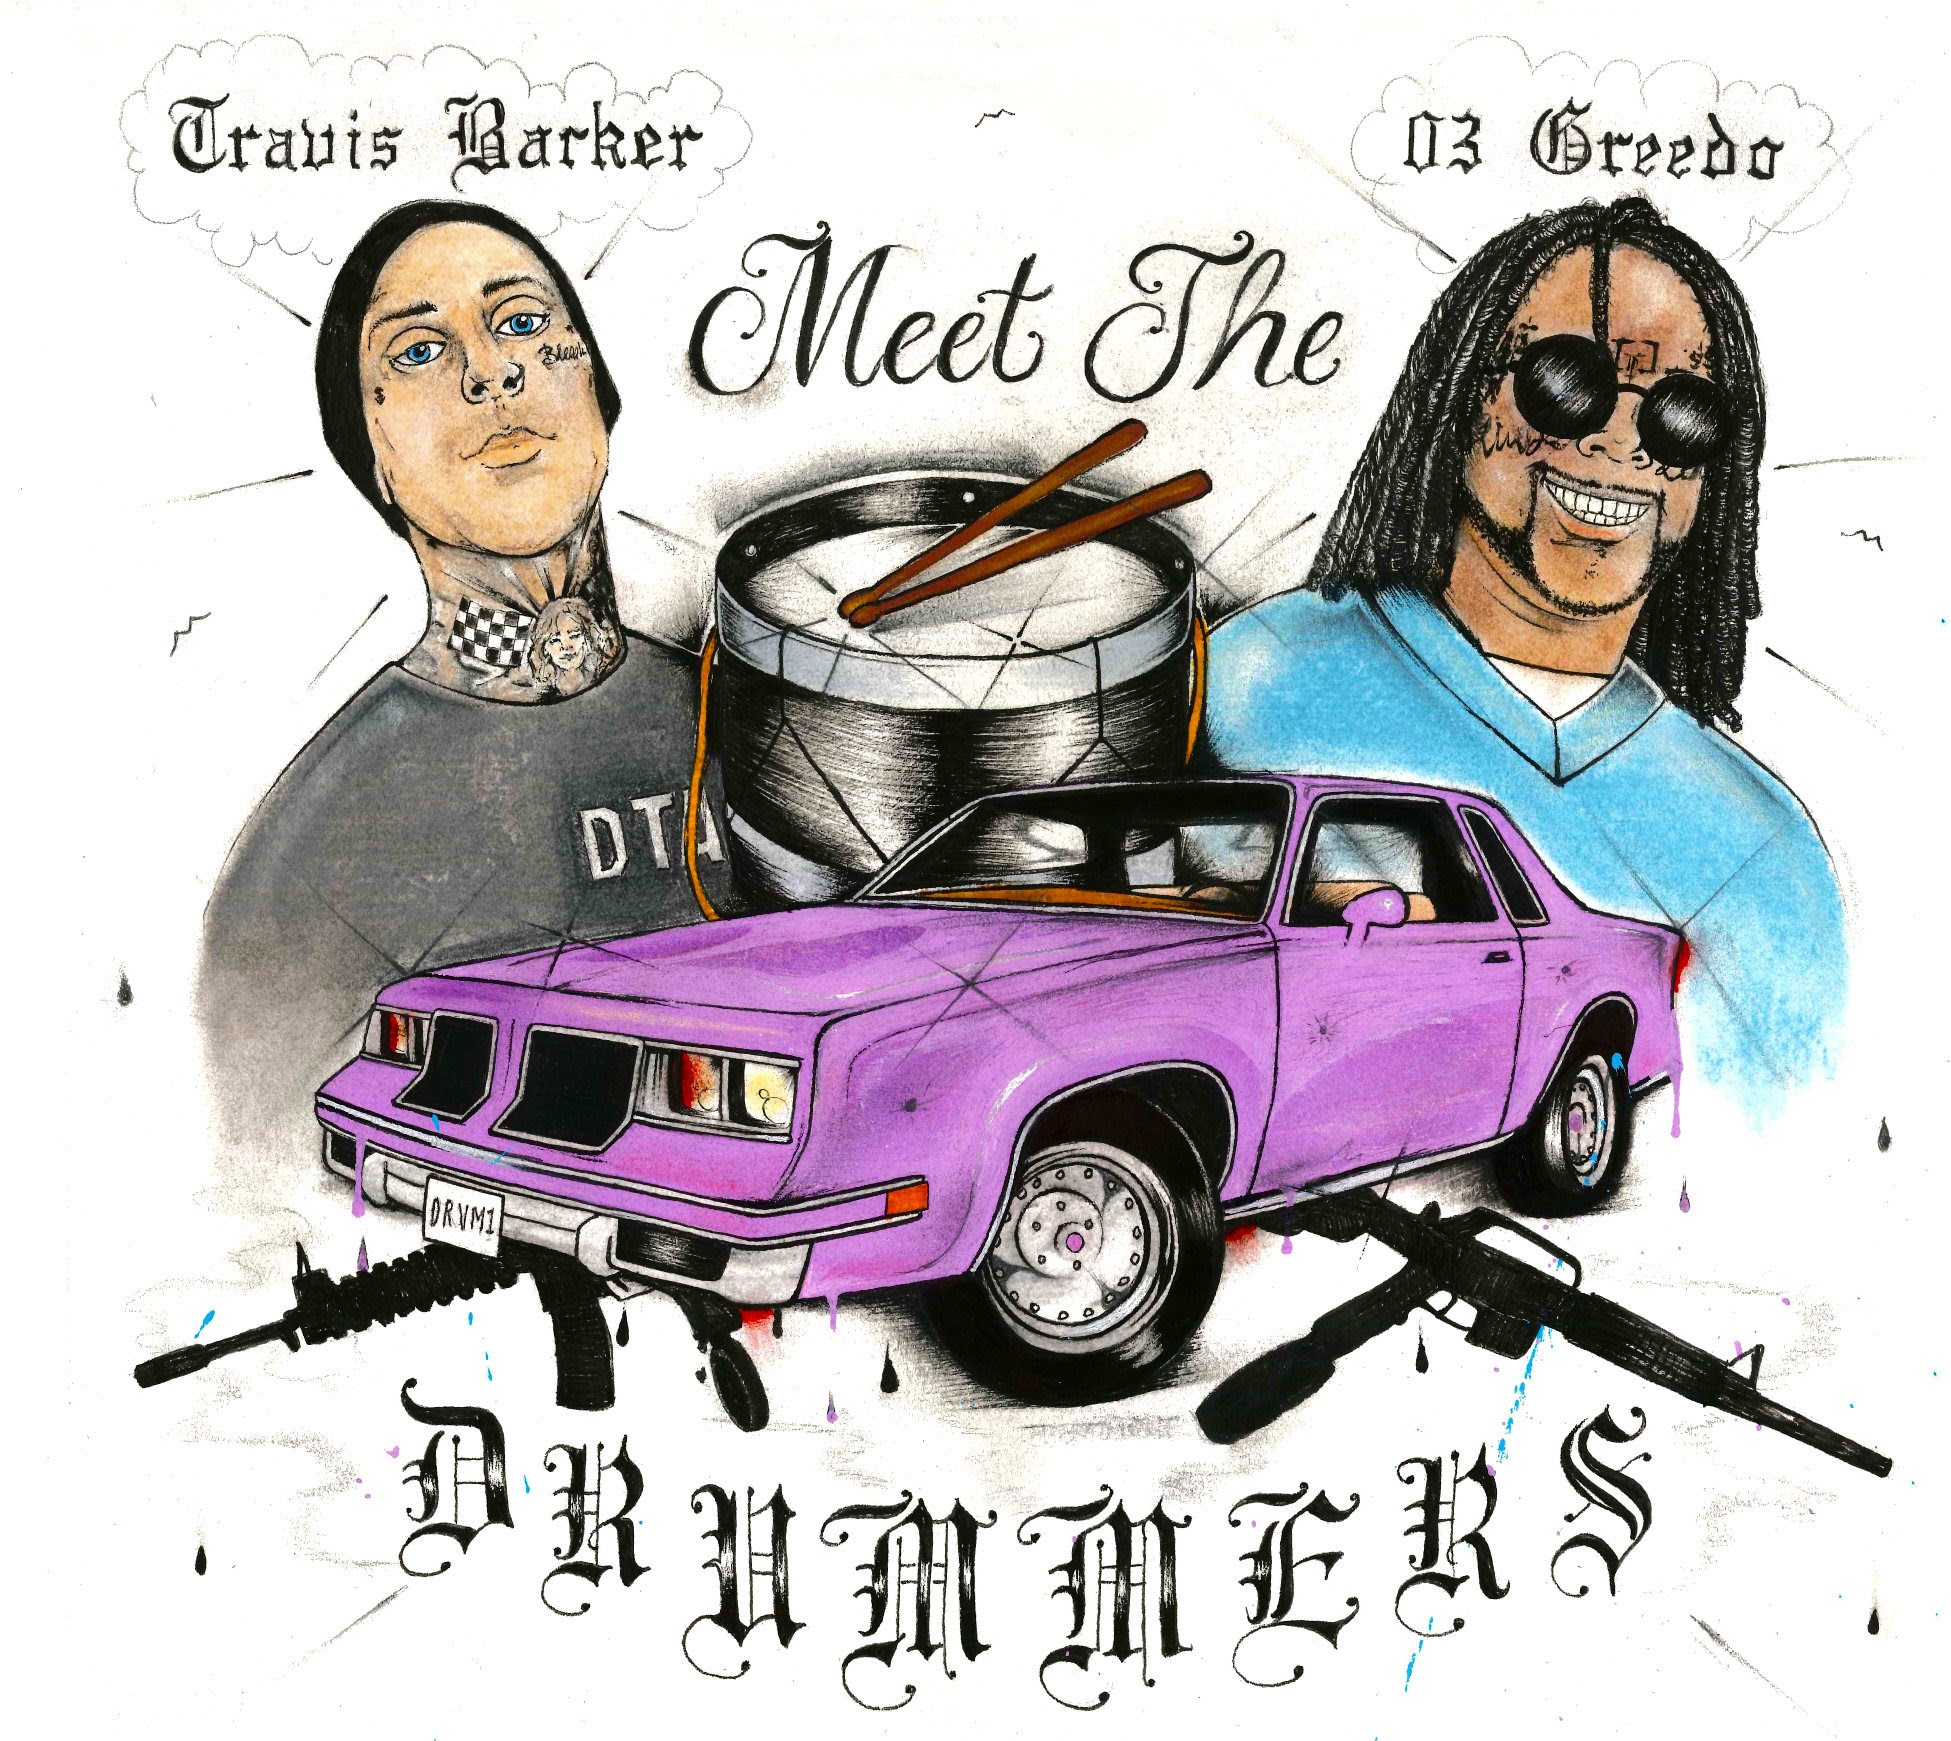 03 Greedo and Travis Barker Announce <i></noscript>Meet the Drummers</i> EP, Release “Cellout”” title=”unnamed-31-1562167889″ data-original-id=”332978″ data-adjusted-id=”332978″ class=”sm_size_full_width sm_alignment_center ” data-image-use=”multiple_use” data-image-source=”video_screenshot” />
</p> </div>
</div>
</div>
</div>
</div>
</section>
<section data-particle_enable=